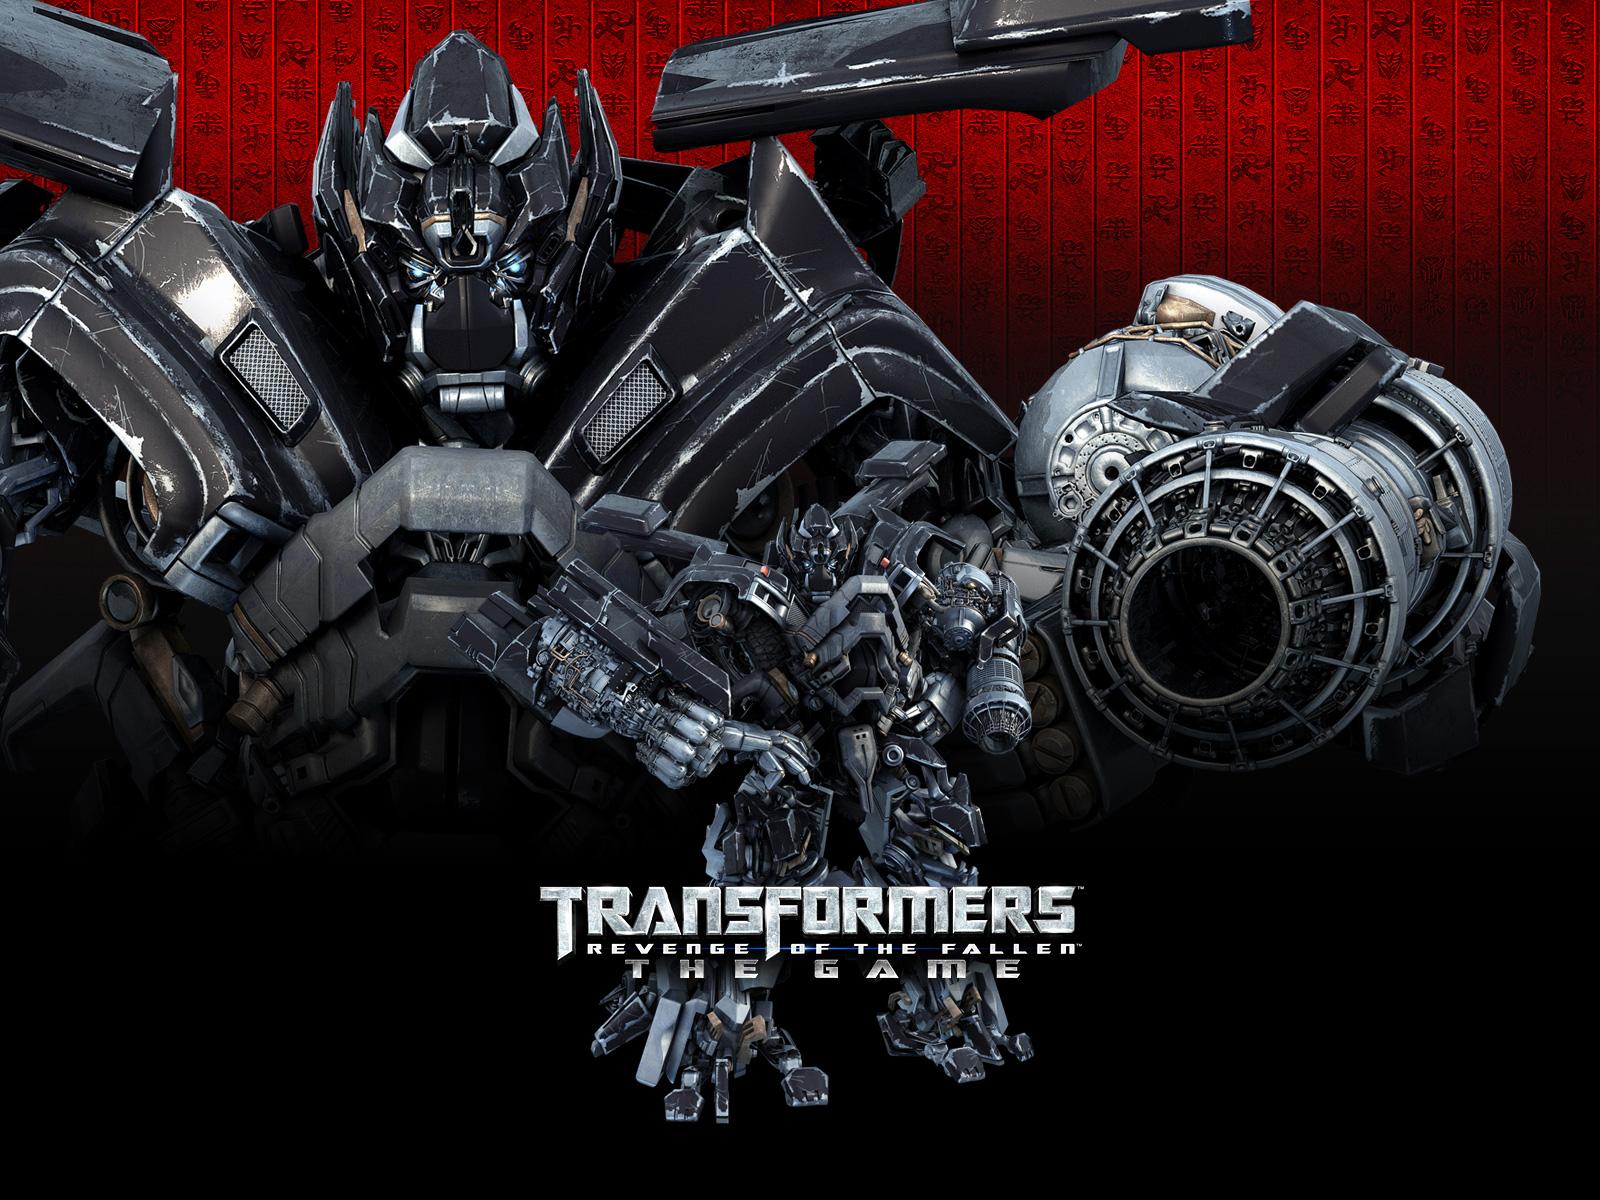 Picture Transformers Transformers: Revenge of the Fallen